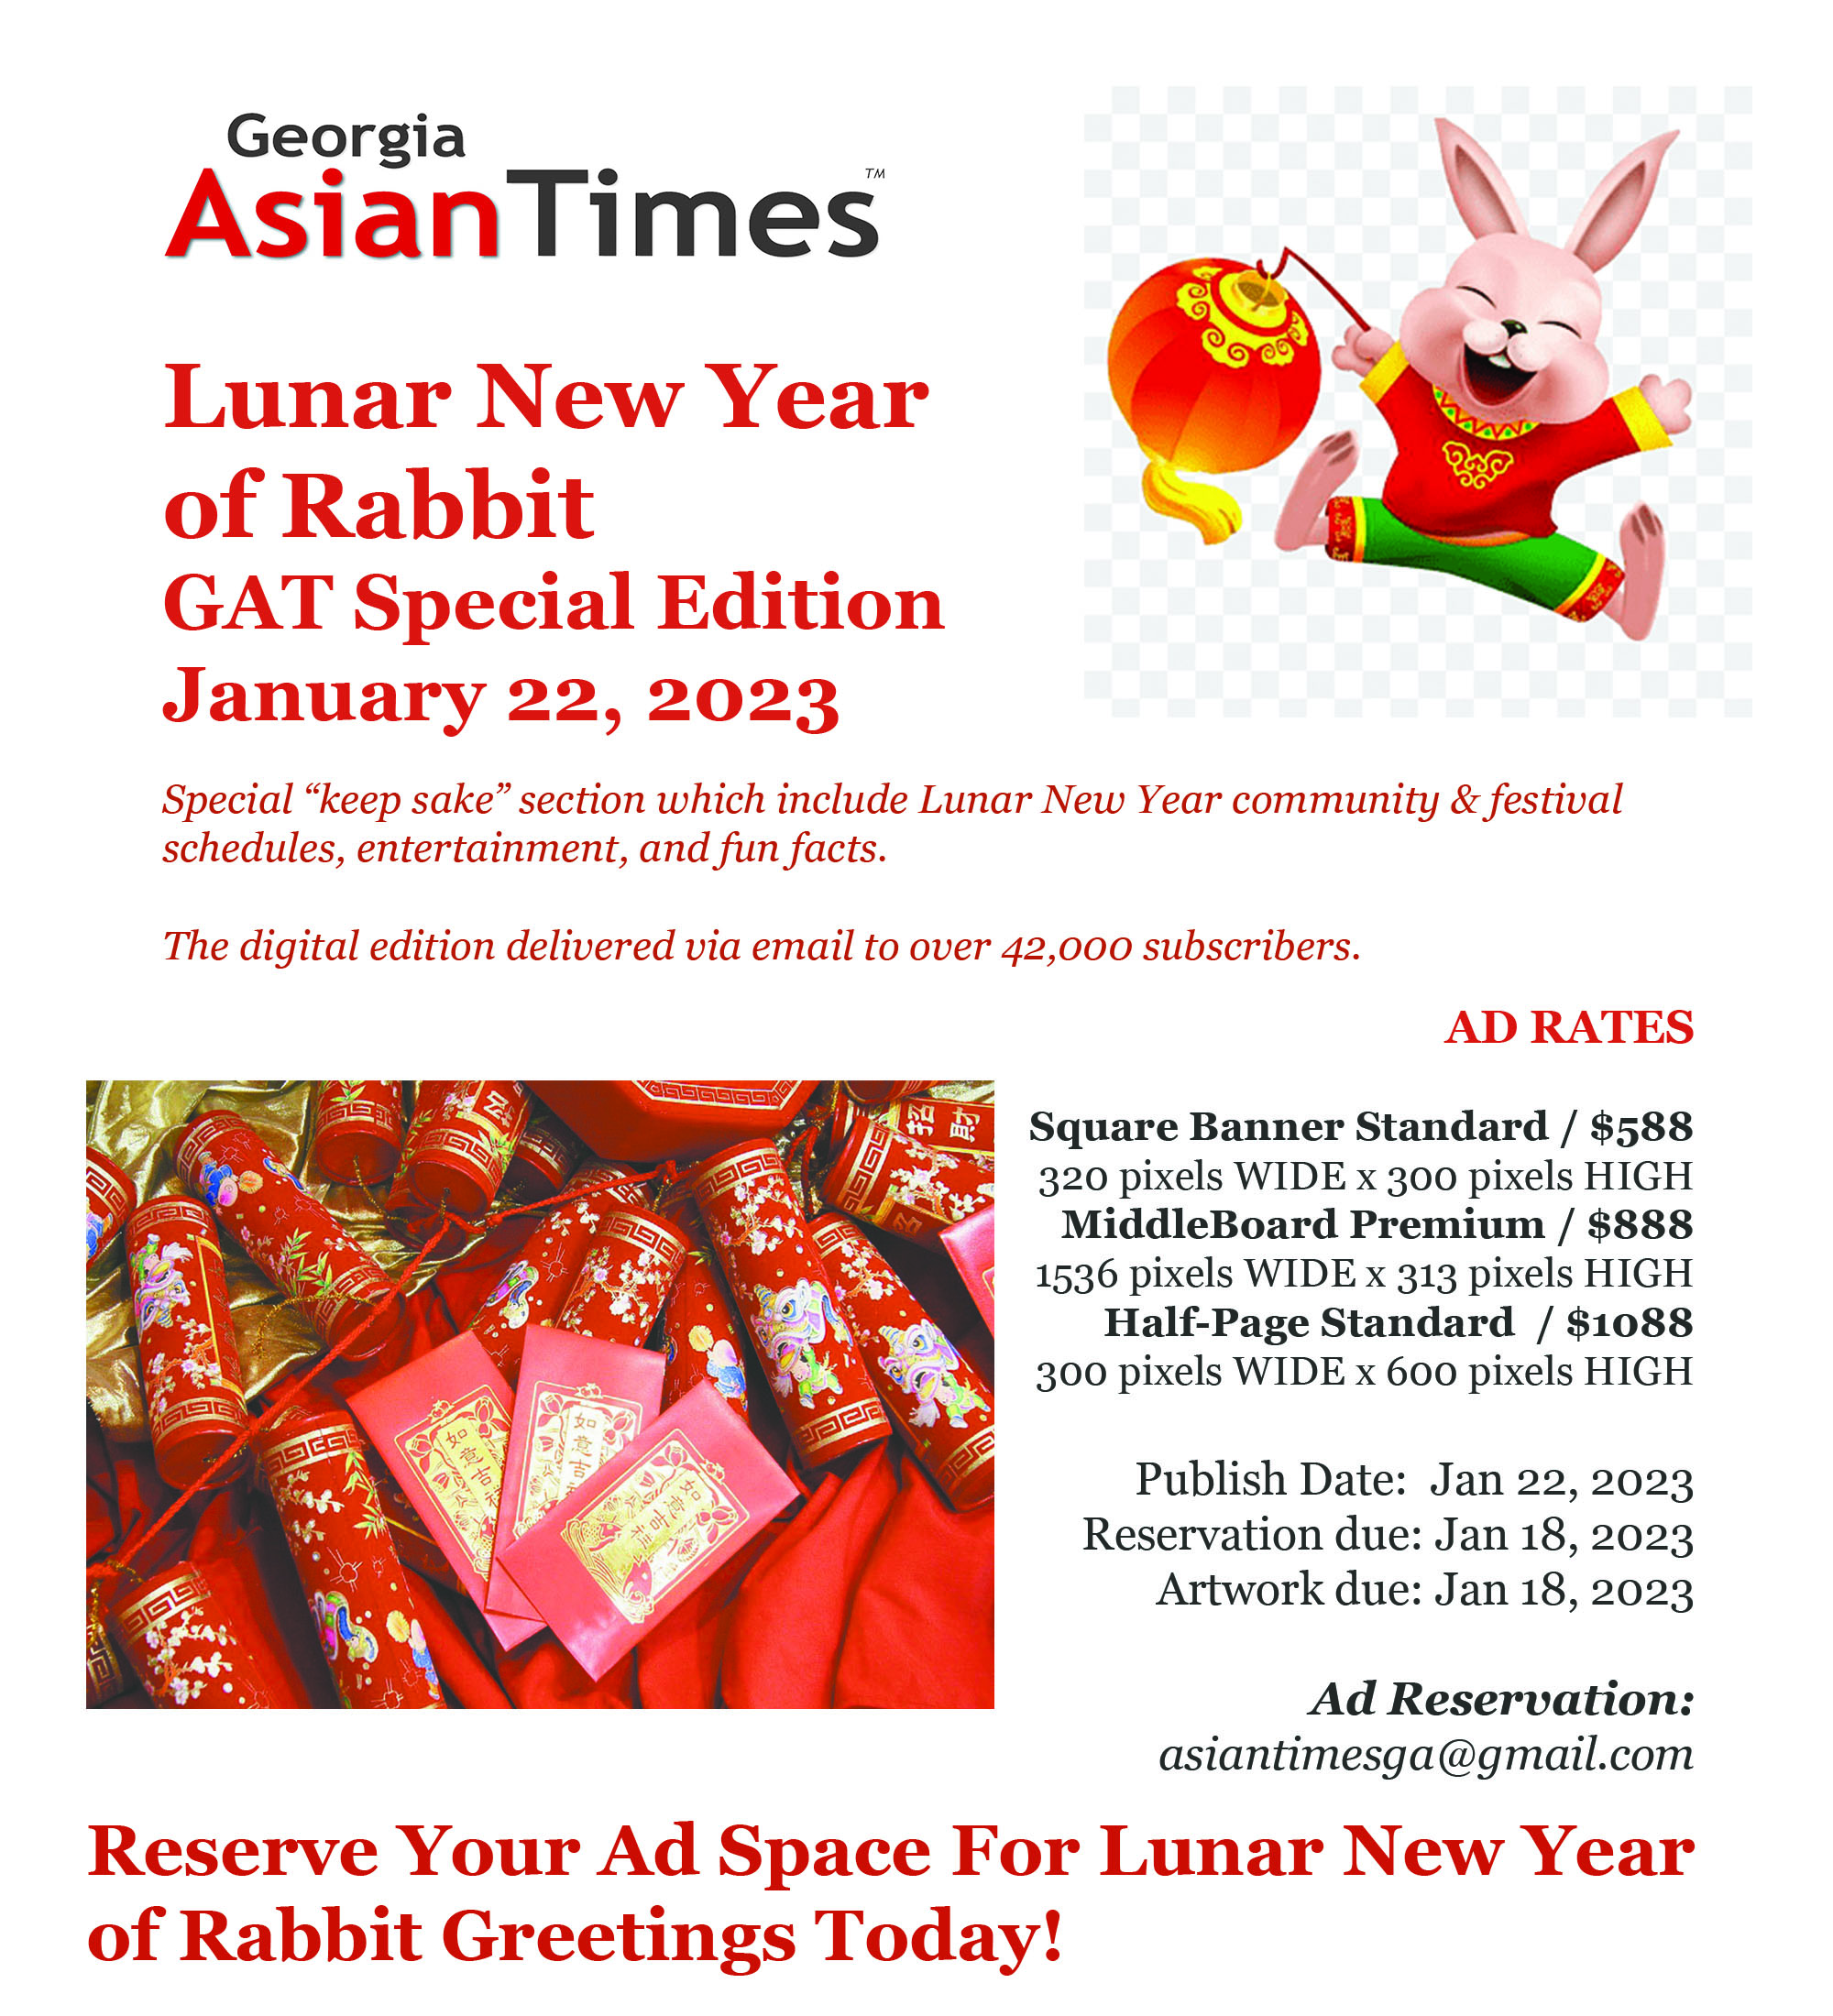 Lunar New Year of Rabbit - GAT Special Section